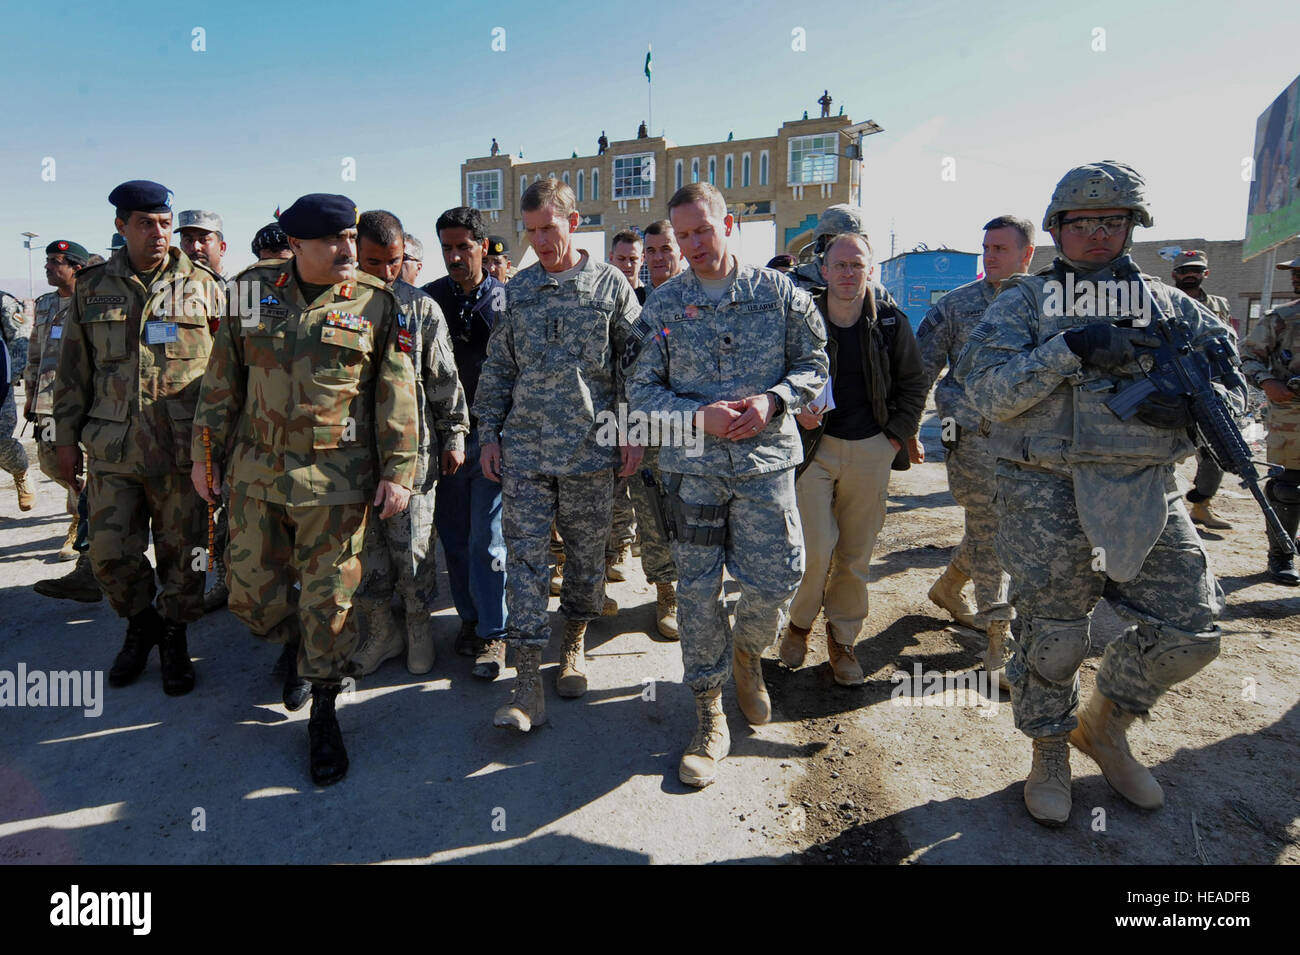 U.S. Army Gen. Stanley McChrystal, commander of the International Security Assistance Force, meets with Pakistani army Lt. Gen. Khalid Wynne, commander of Southern Command, at the Friendship Gate border crossing Jan. 18, 2010, in Spin Boldak, Afghanistan.  Tech. Sgt. Francisco V. Govea II Stock Photo